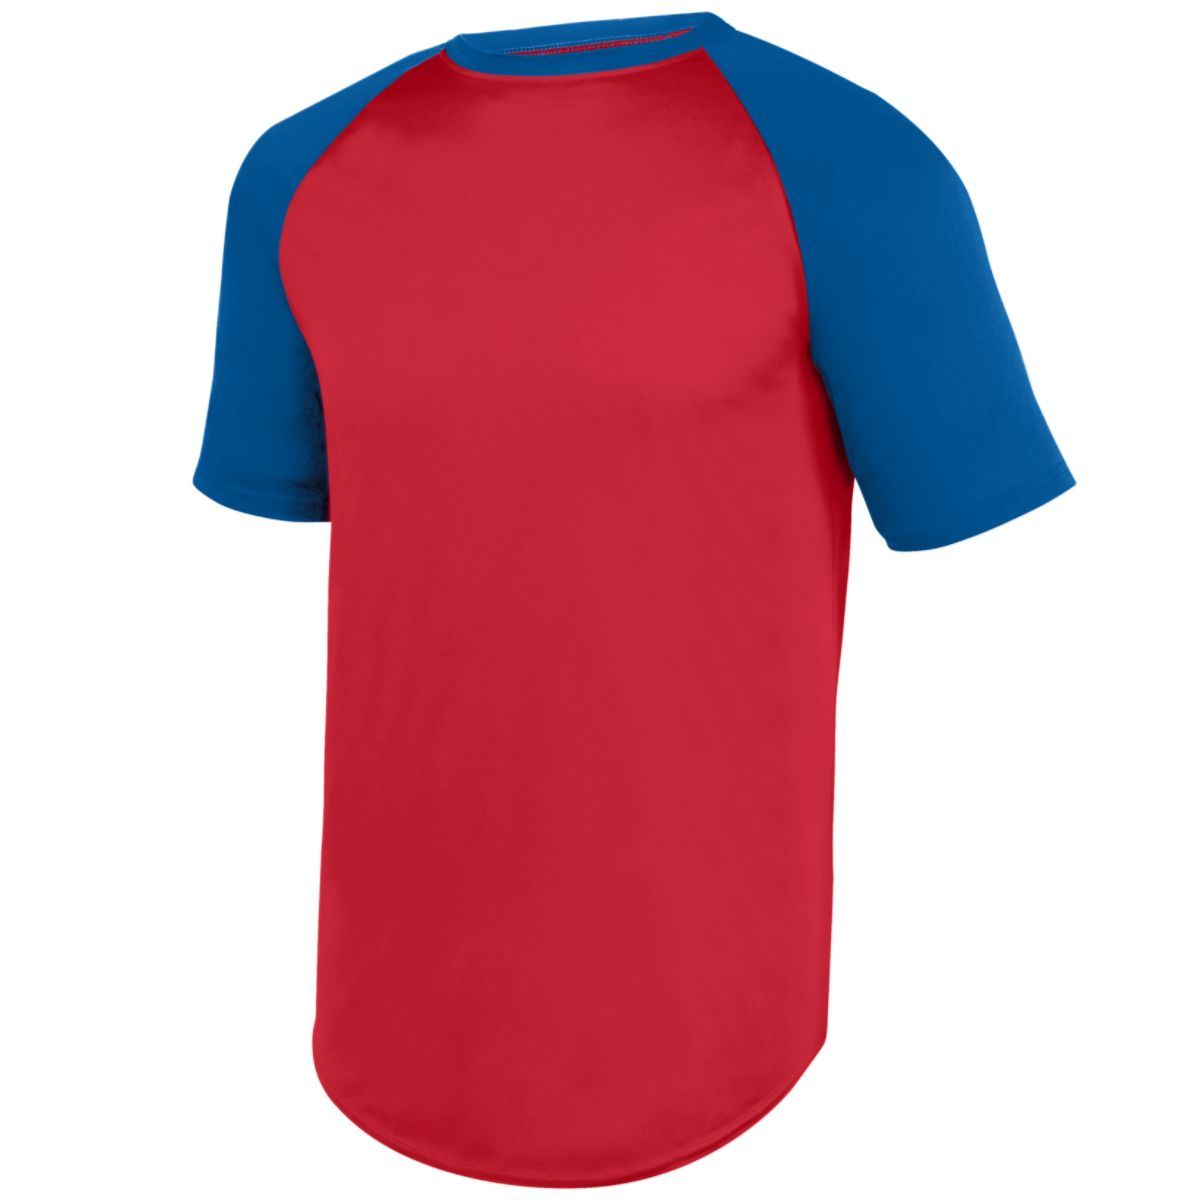 Augusta Sportswear Youth Wicking Short Sleeve Baseball Jersey in Red/Royal  -Part of the Youth, Youth-Jersey, Augusta-Products, Baseball, Shirts, All-Sports, All-Sports-1 product lines at KanaleyCreations.com